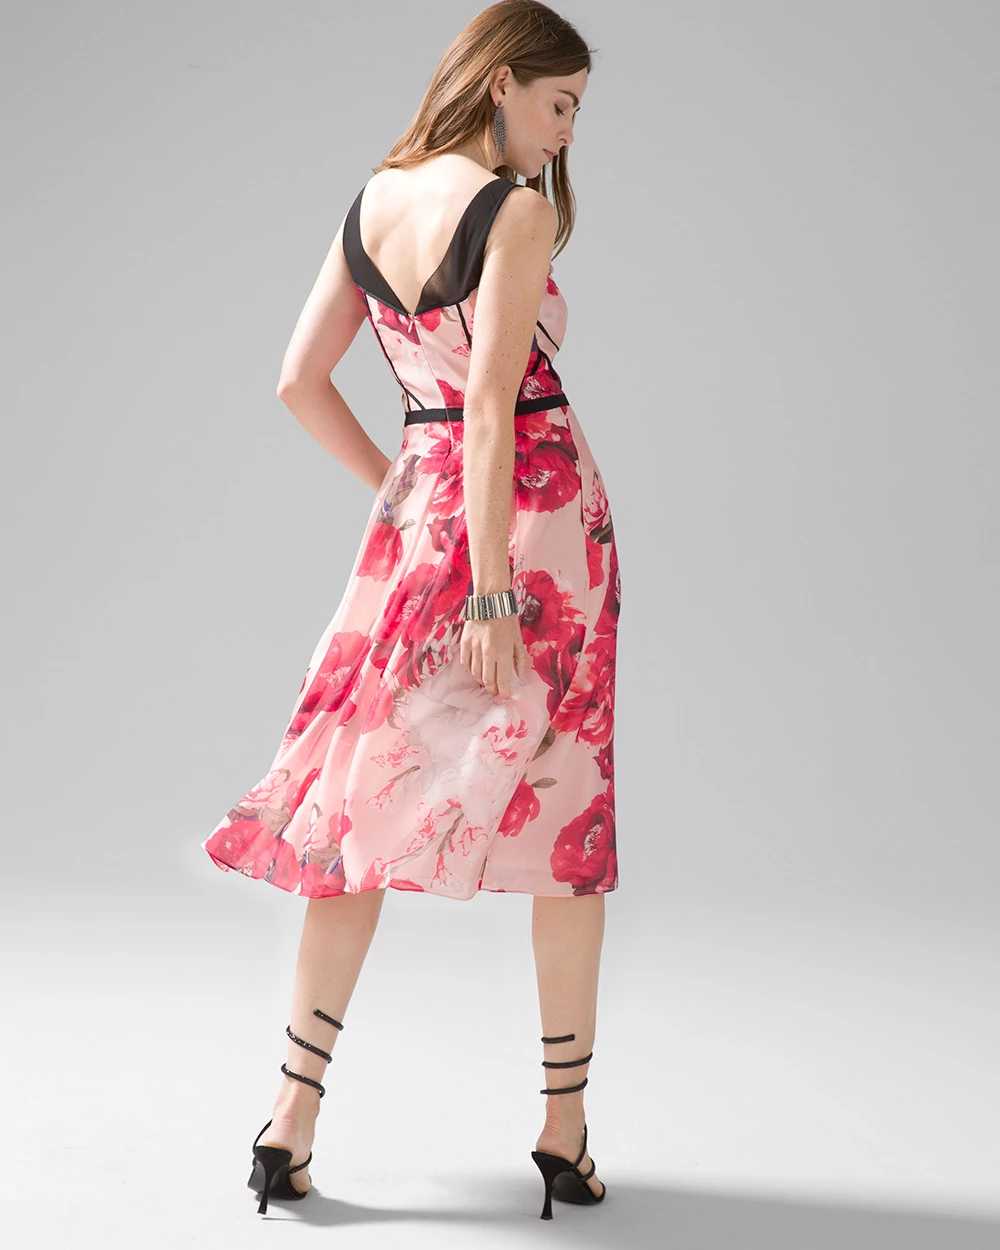 Petite Short-Sleeve Floral Organza Midi Dress click to view larger image.